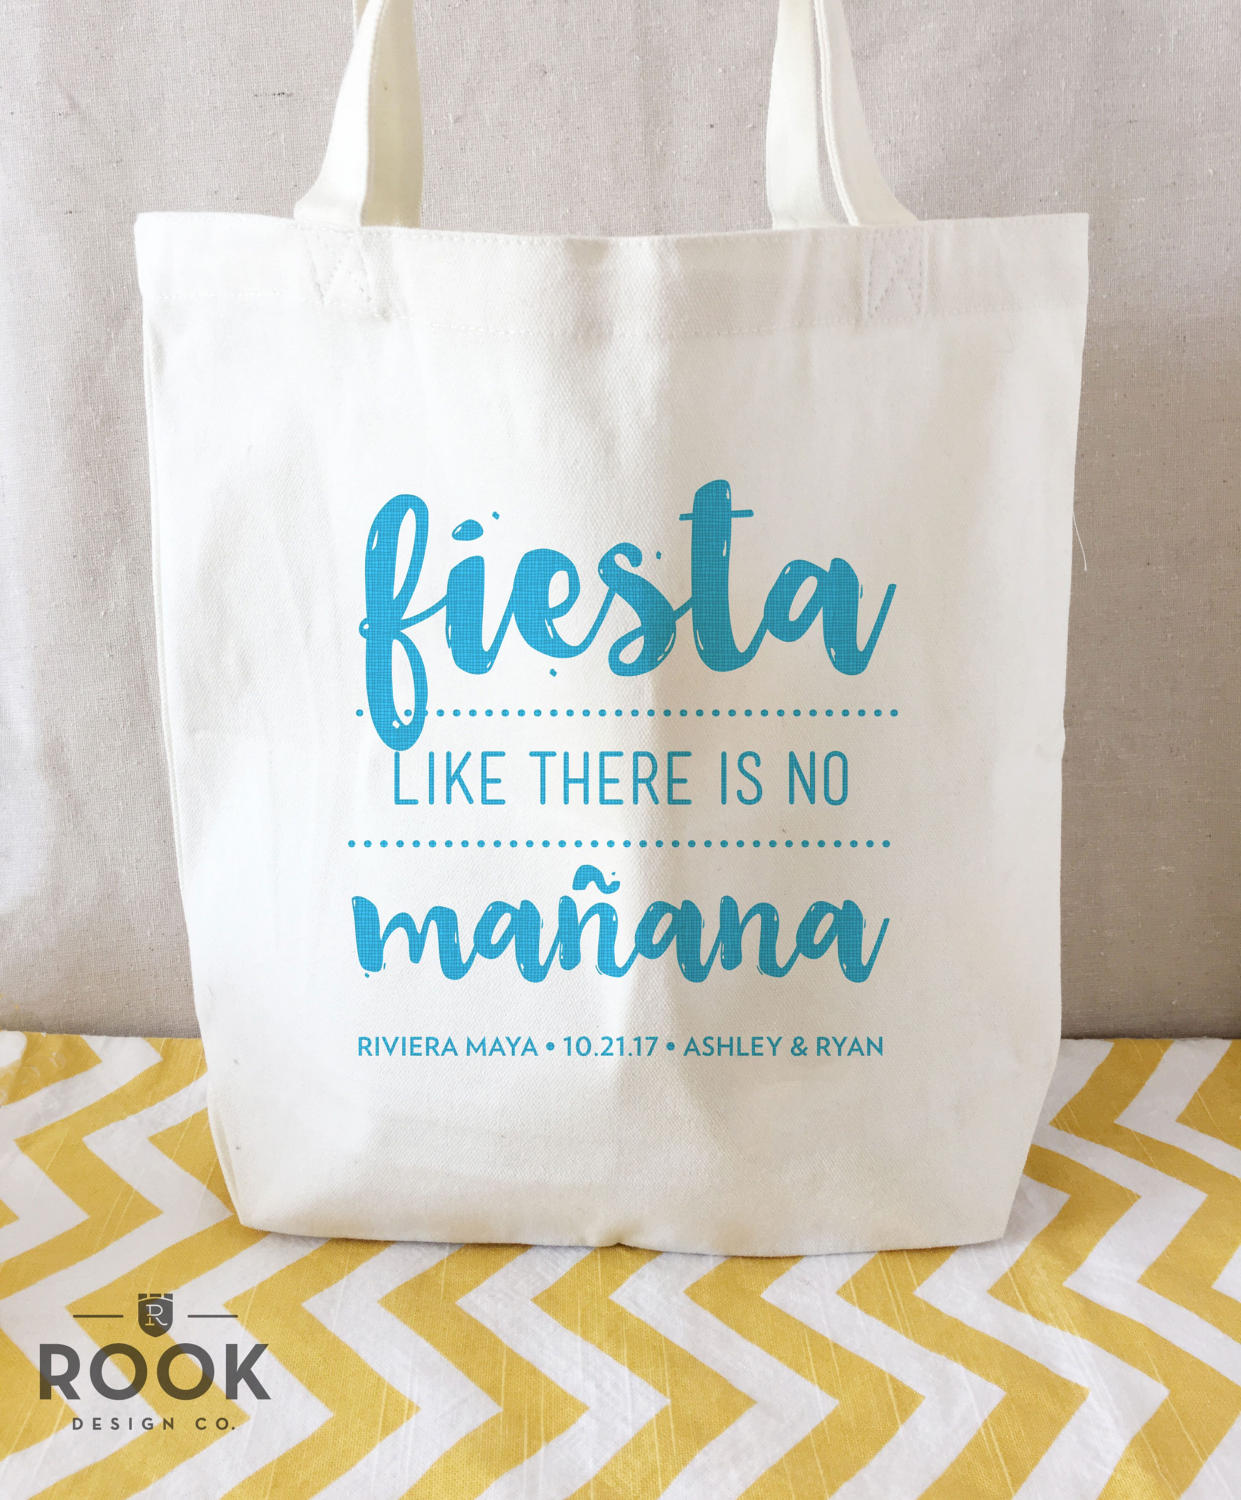 Fiesta Like There is no Manana wedding tote wedding canvas | Etsy